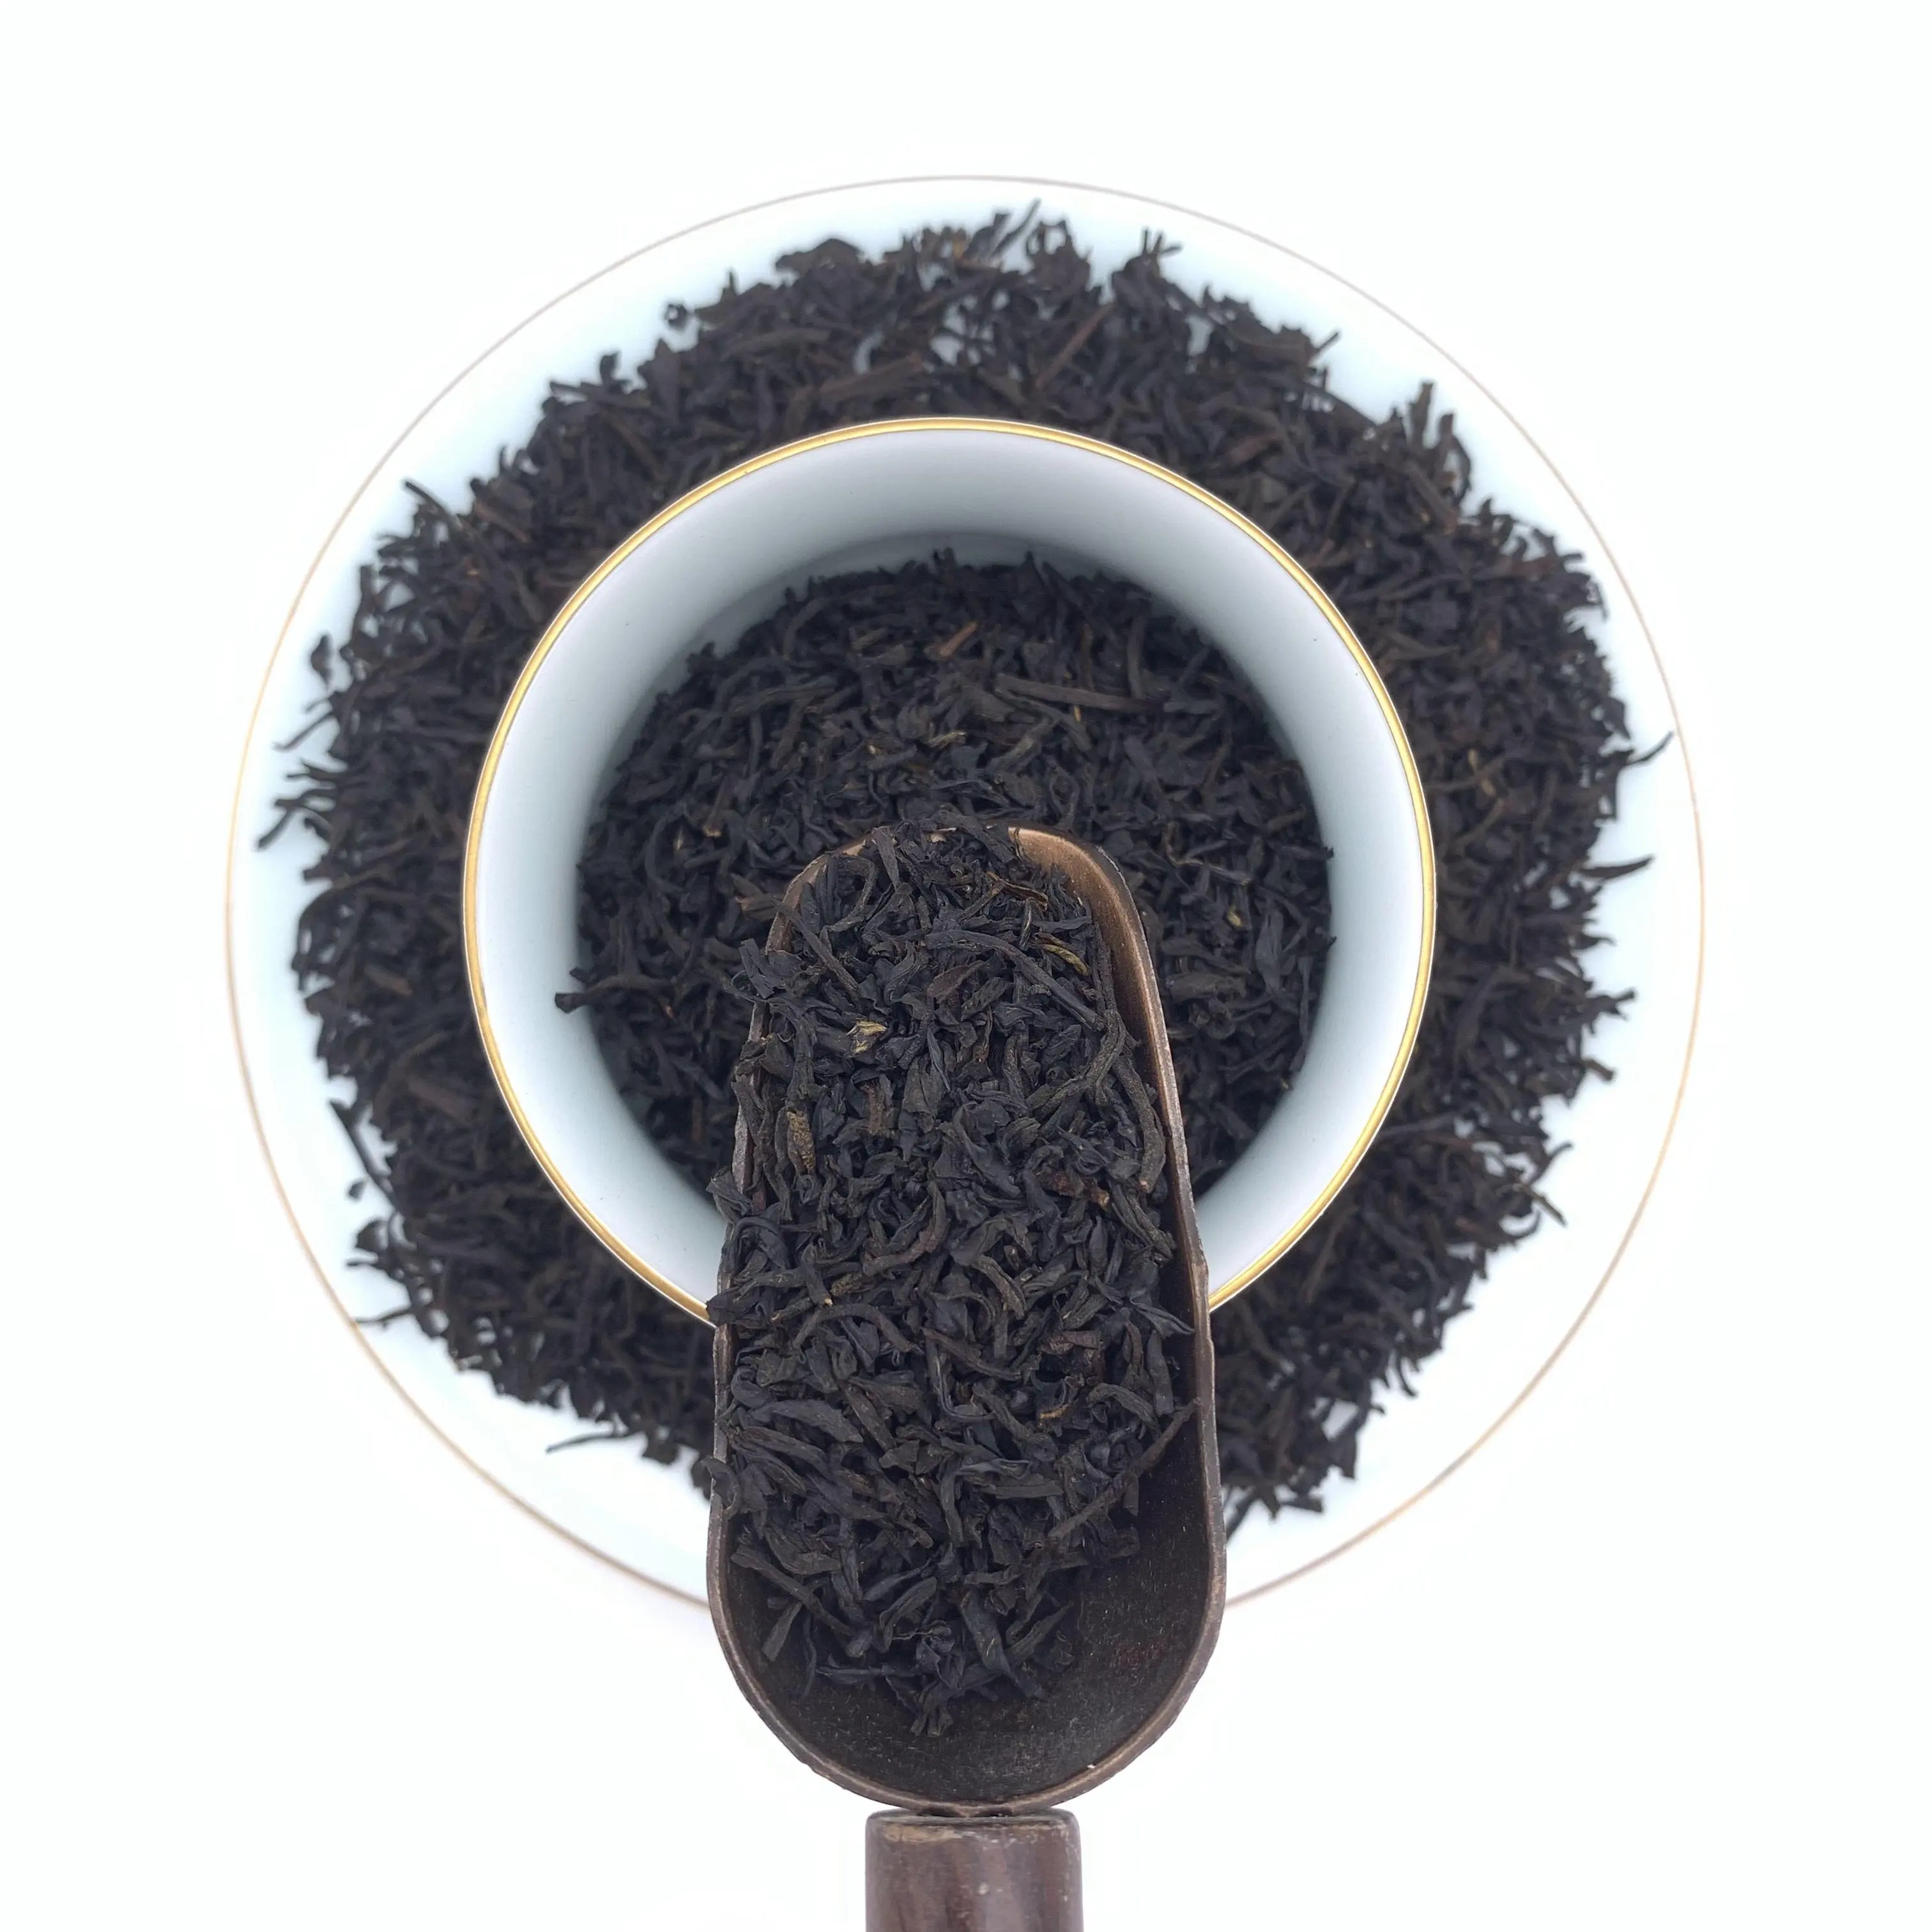 2024 Exquisite Organic EU Standard high quality Earl grey black tea No.2 bo jue hong cha for a perfect afternoon